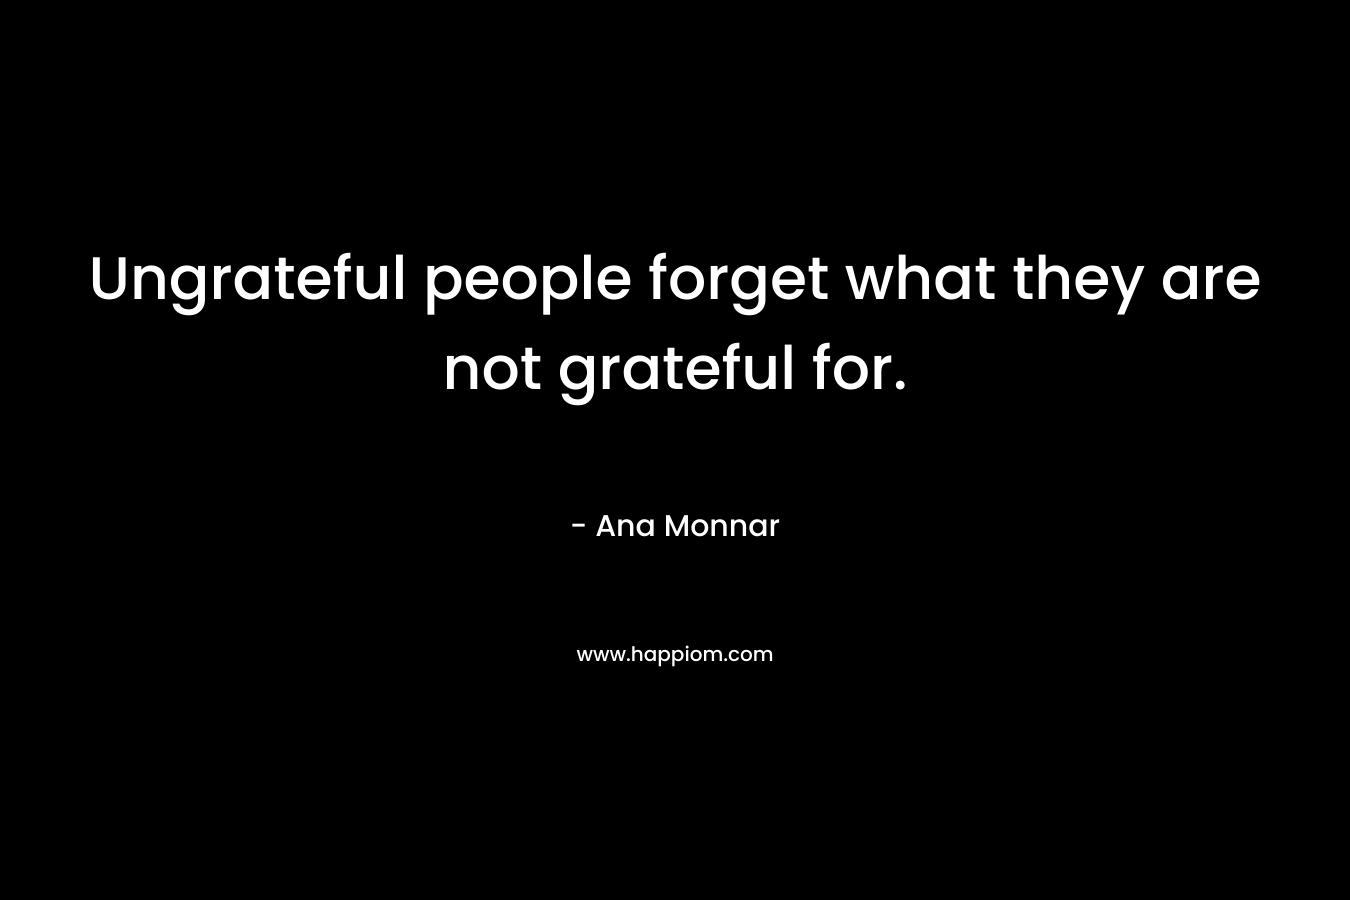 Ungrateful people forget what they are not grateful for.